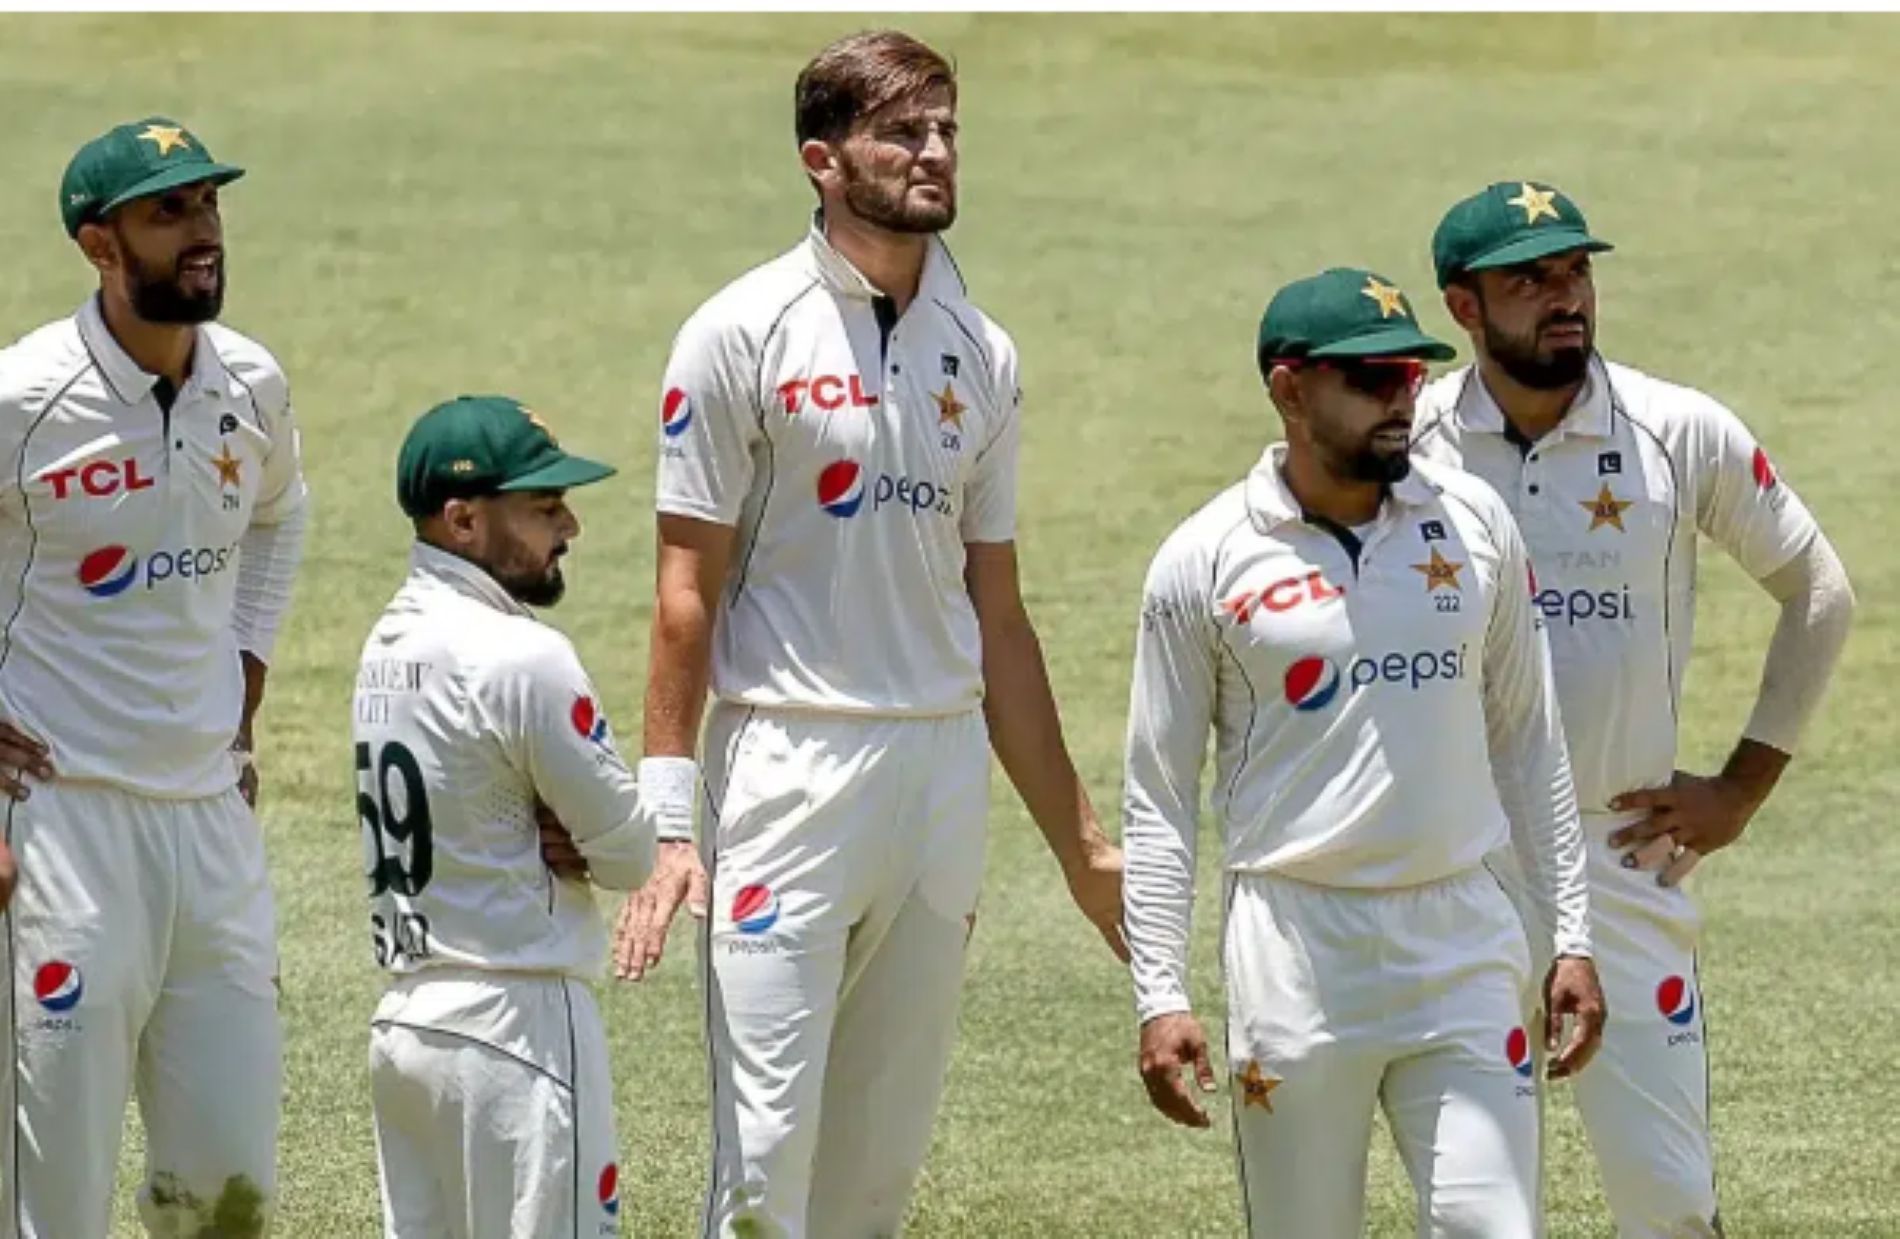 Pakistan were competitive in the second Test at MCG despite the result.